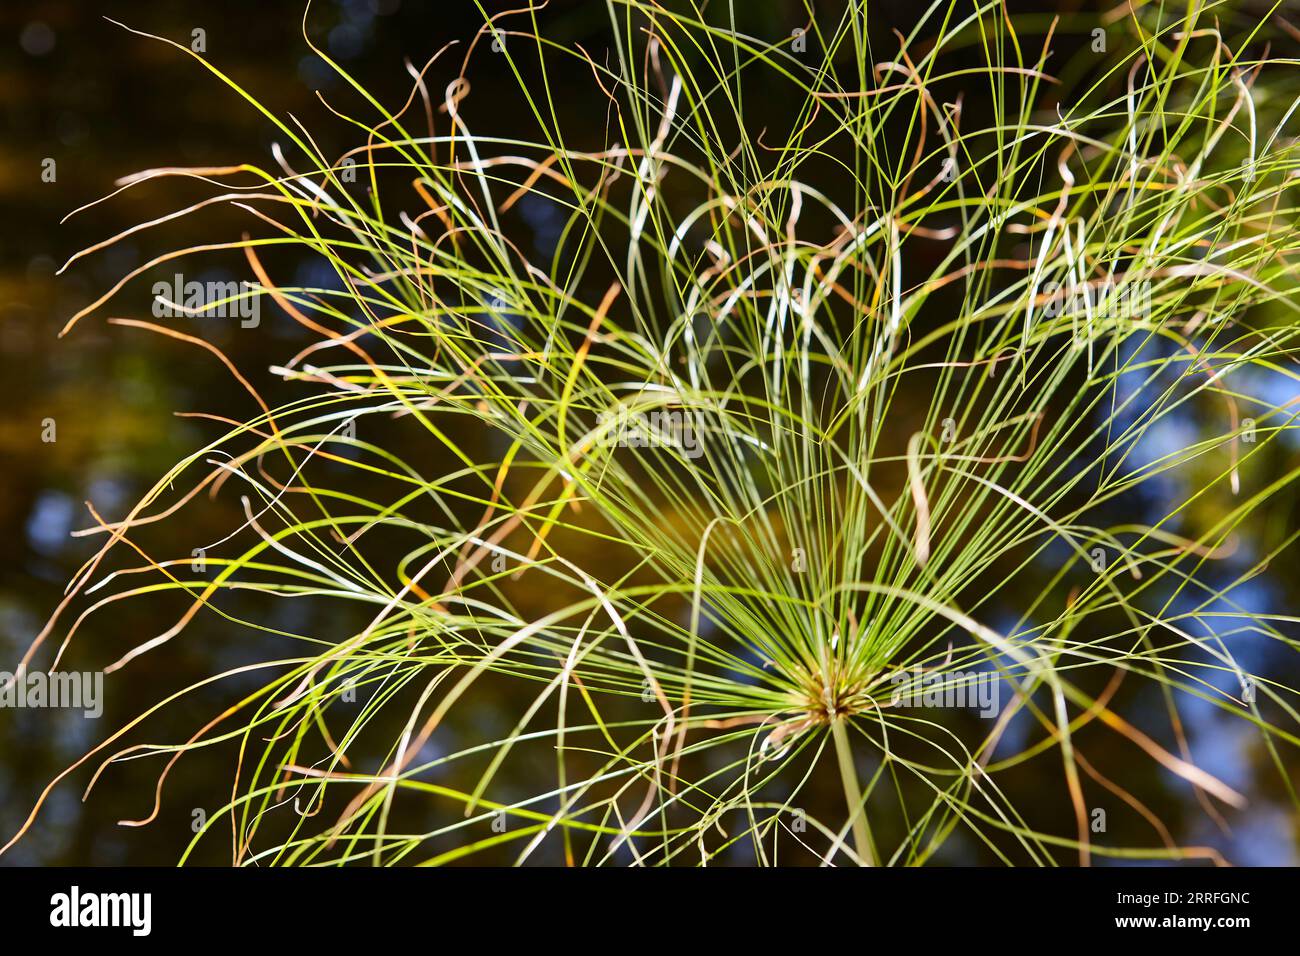 Cyperus papyrus green plant and out of focus background. Botany Stock Photo